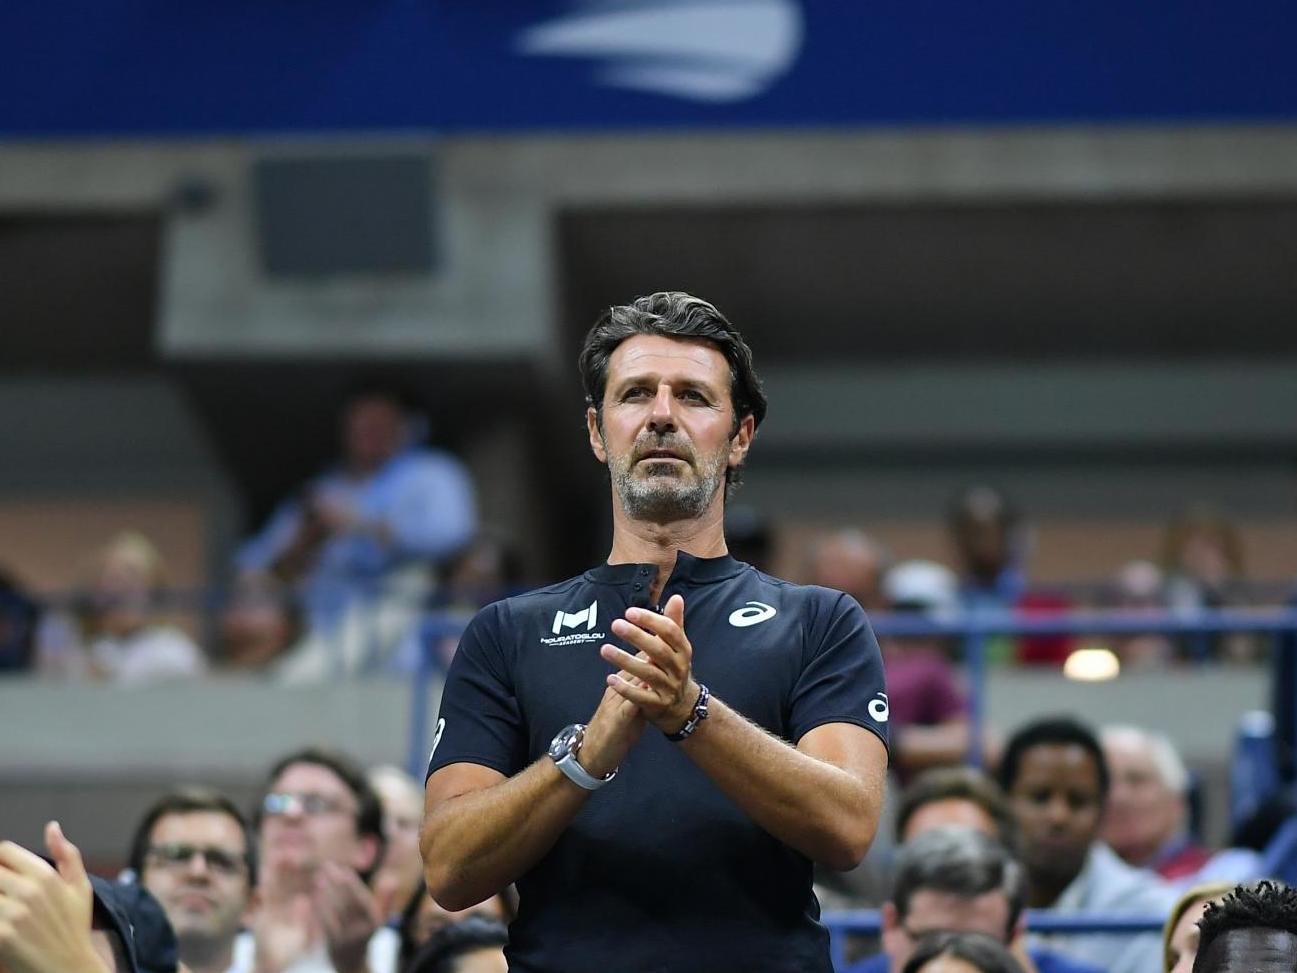 Patrick Mouratoglou will host UTS matches at his academy on the French Riviera